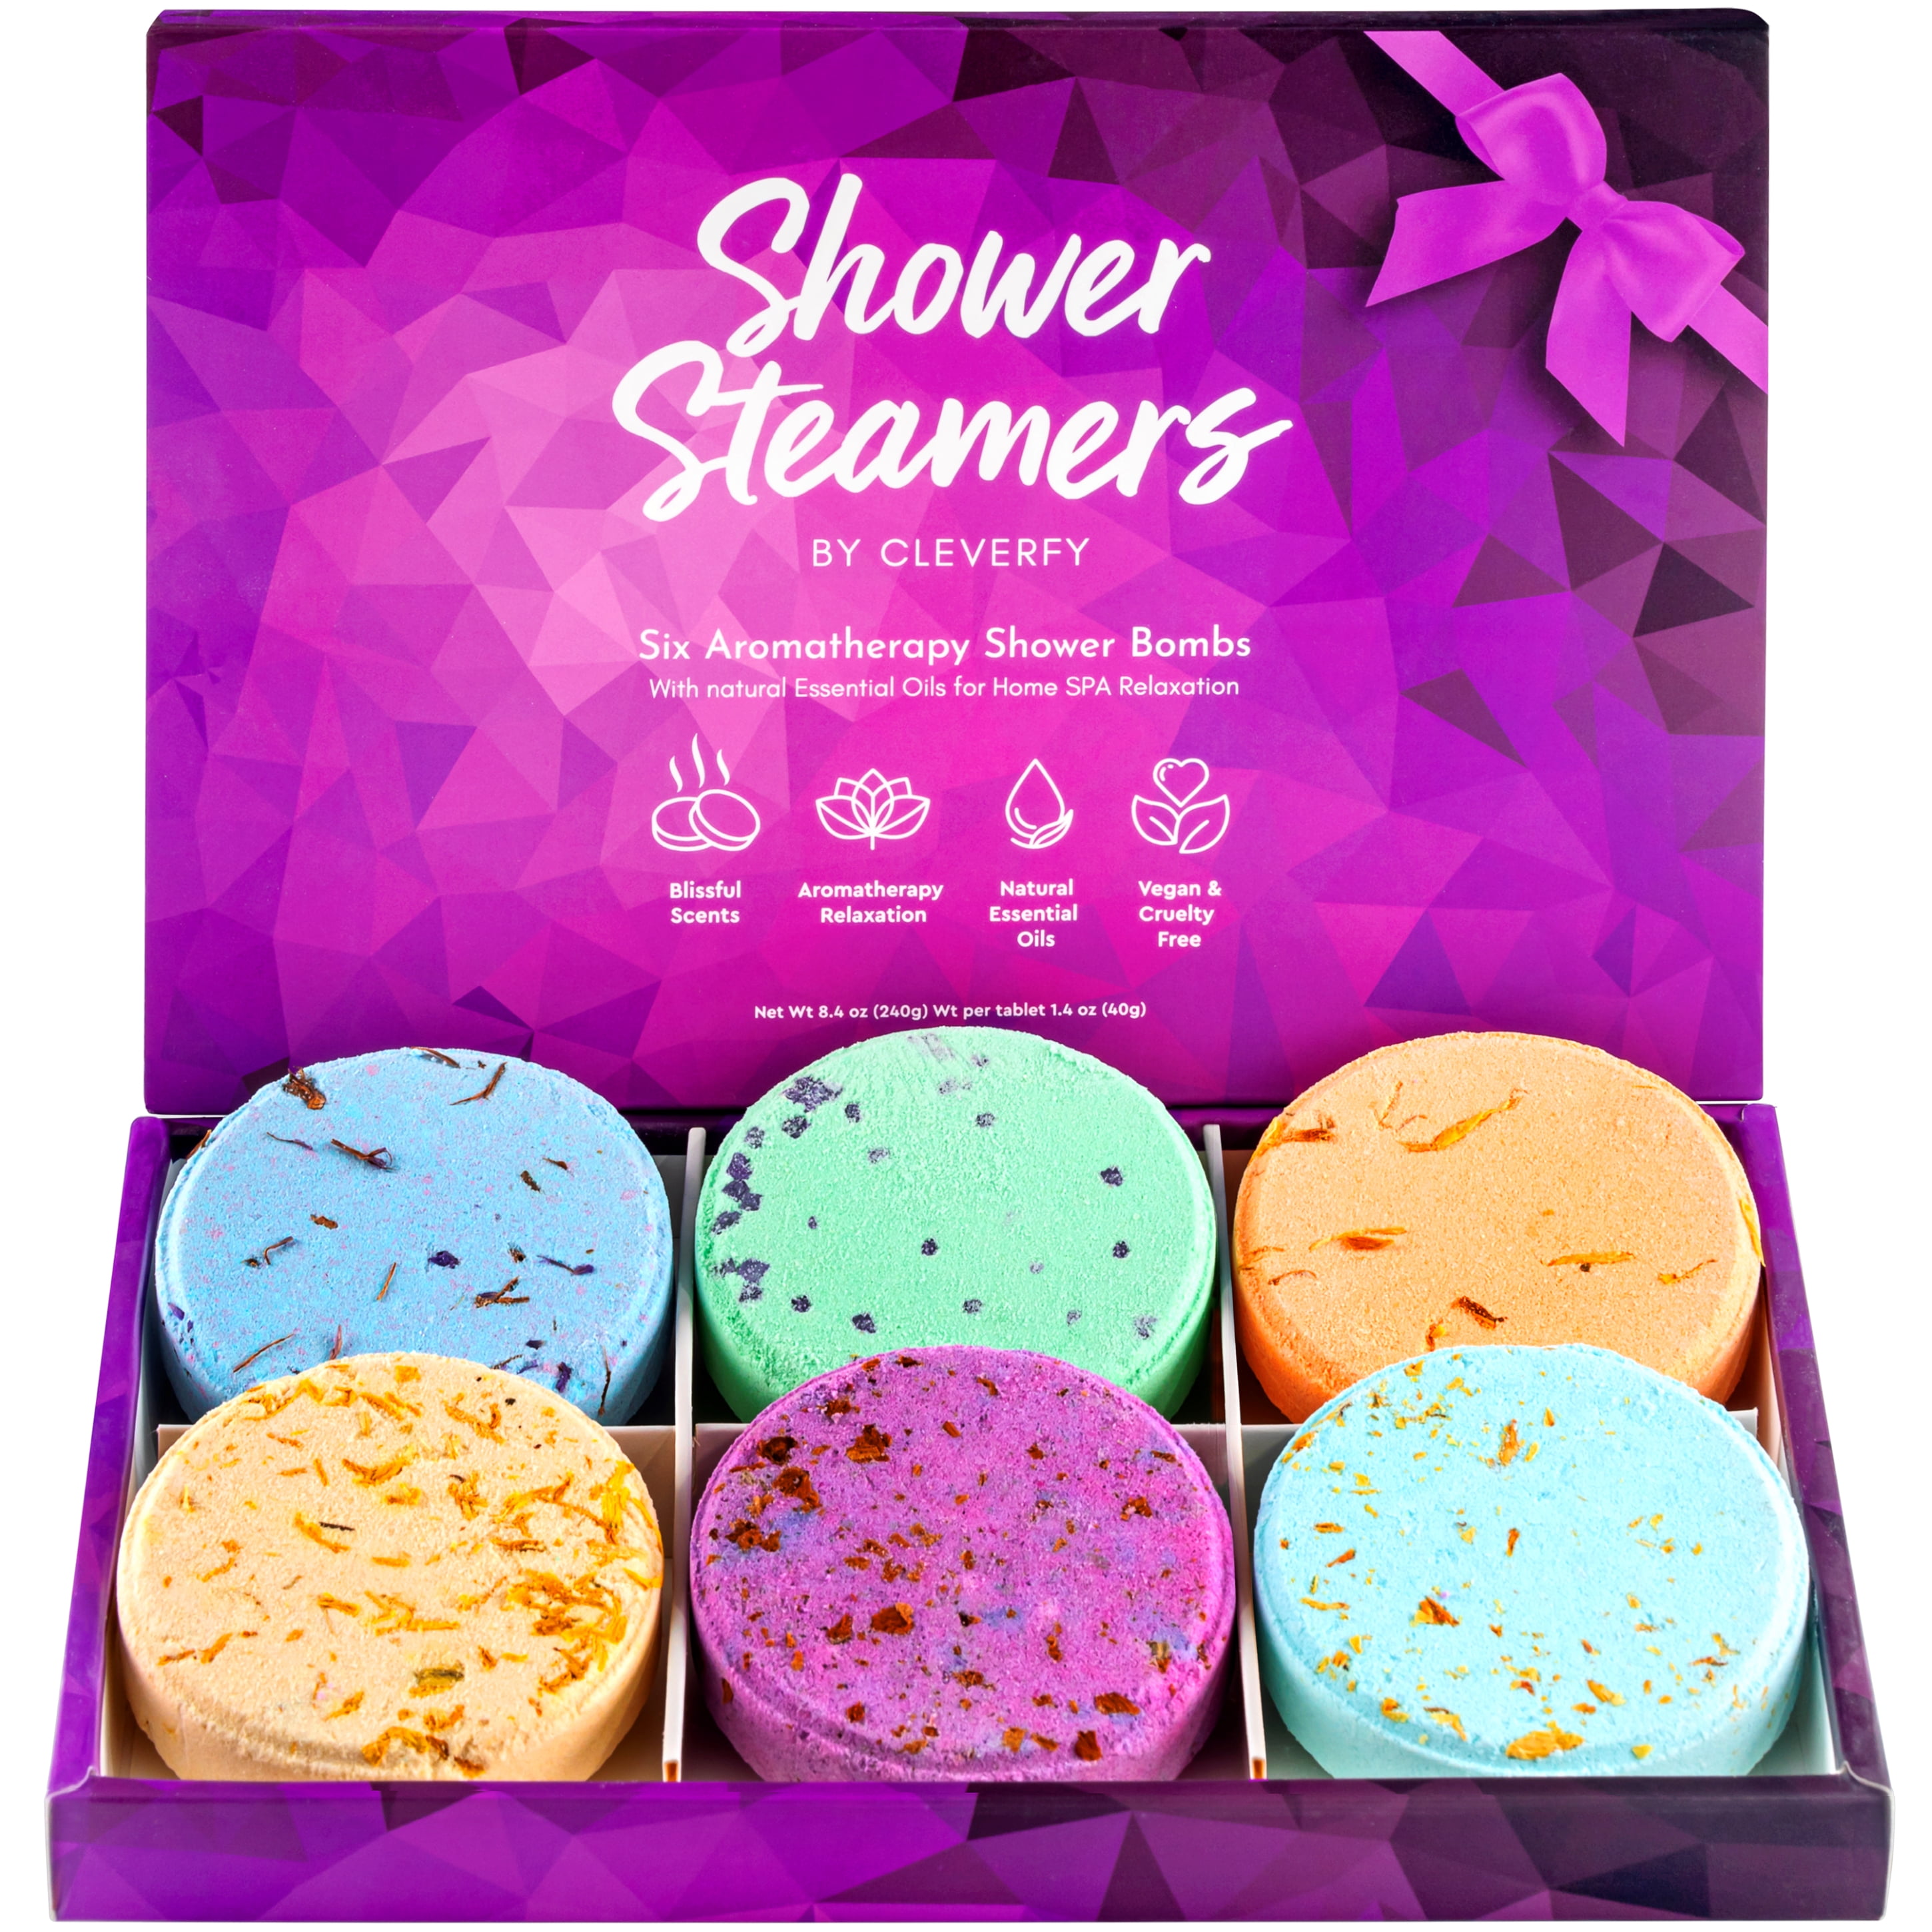  Aromatherapy Shower Steamers Gifts for Mom - Swcandy 8